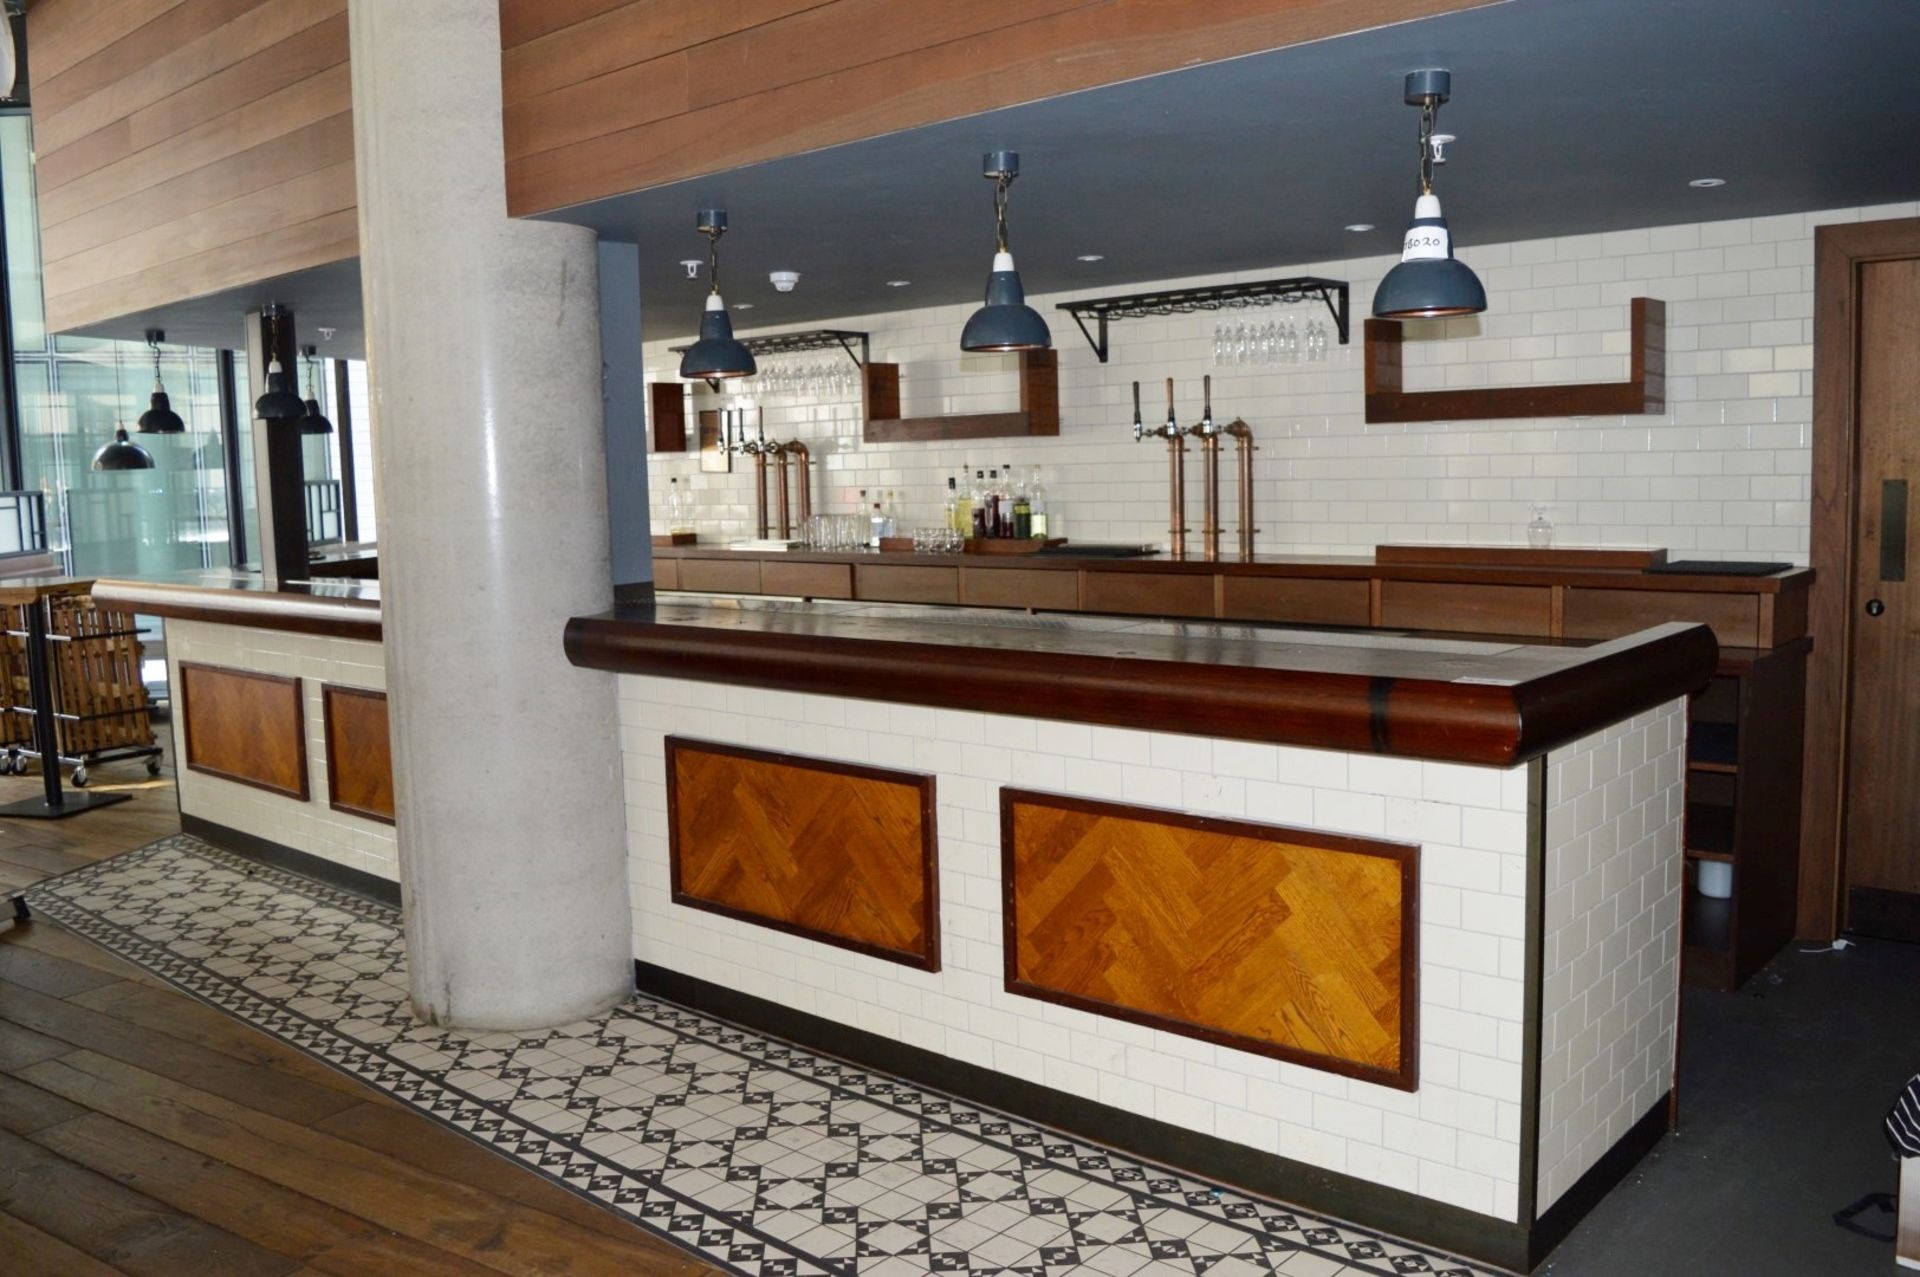 1 x Large Pub / Restuarant Bar With Tiled Front and Framed Parquet Flooring Design - Also Includes